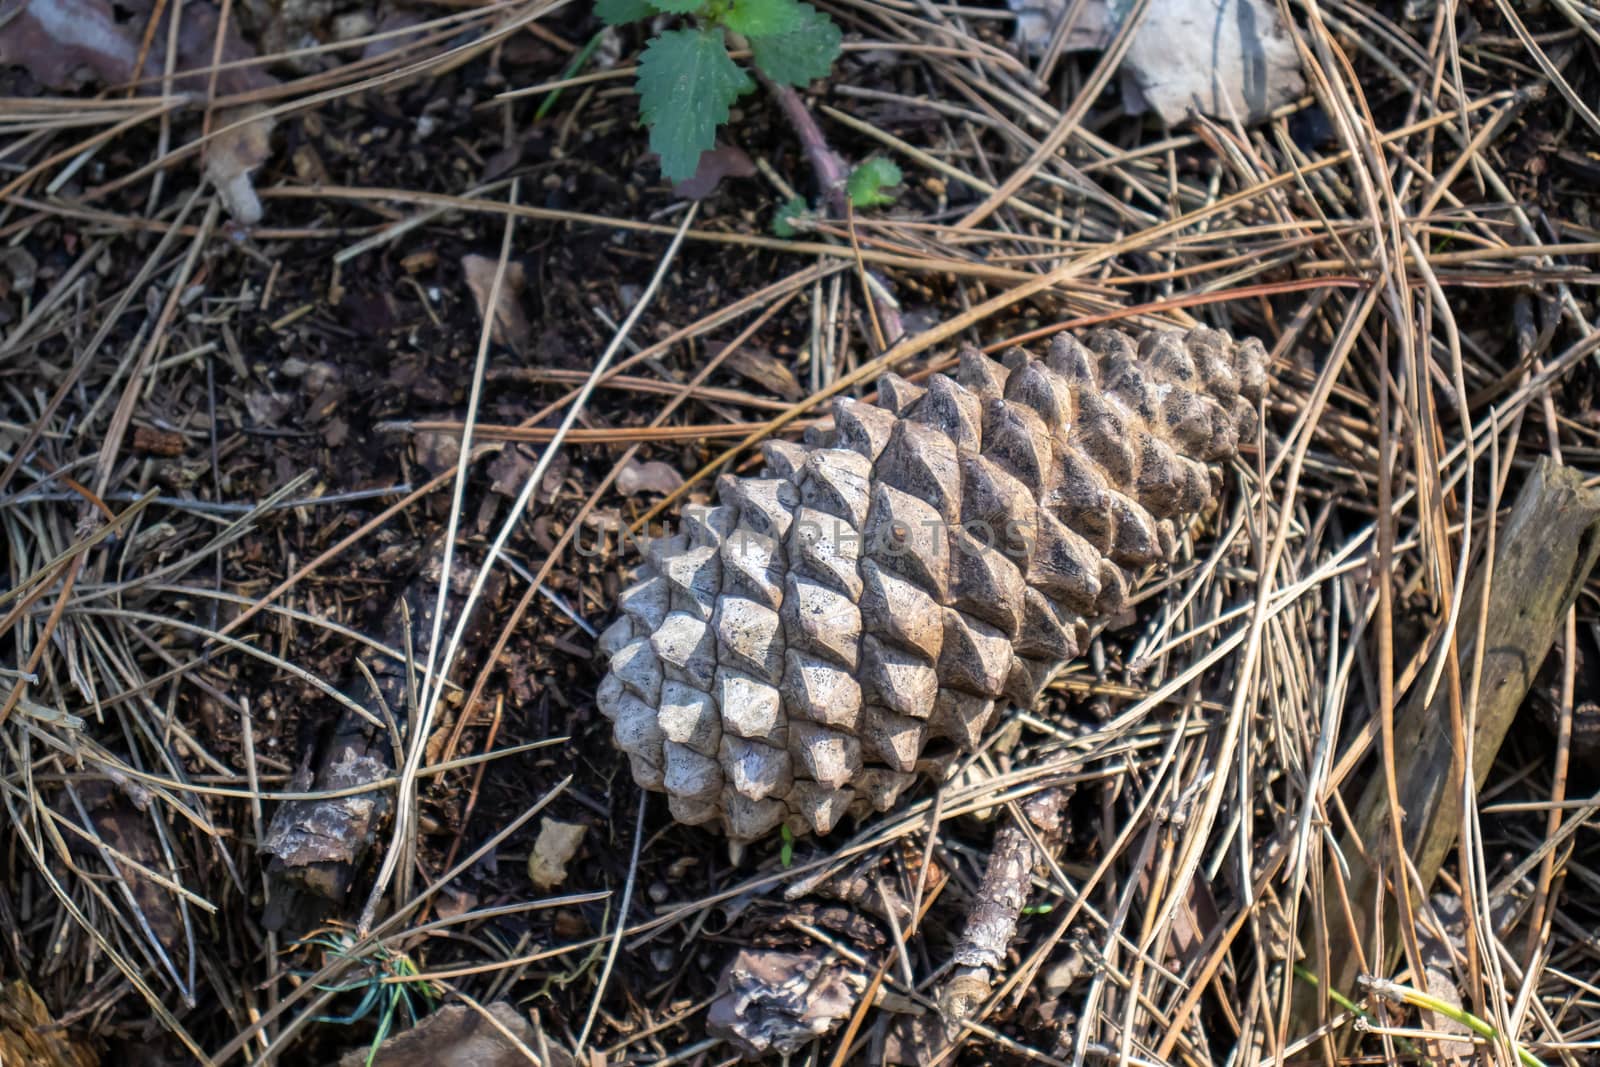 pine cone up close in the ground among the pine needles by Andreajk3